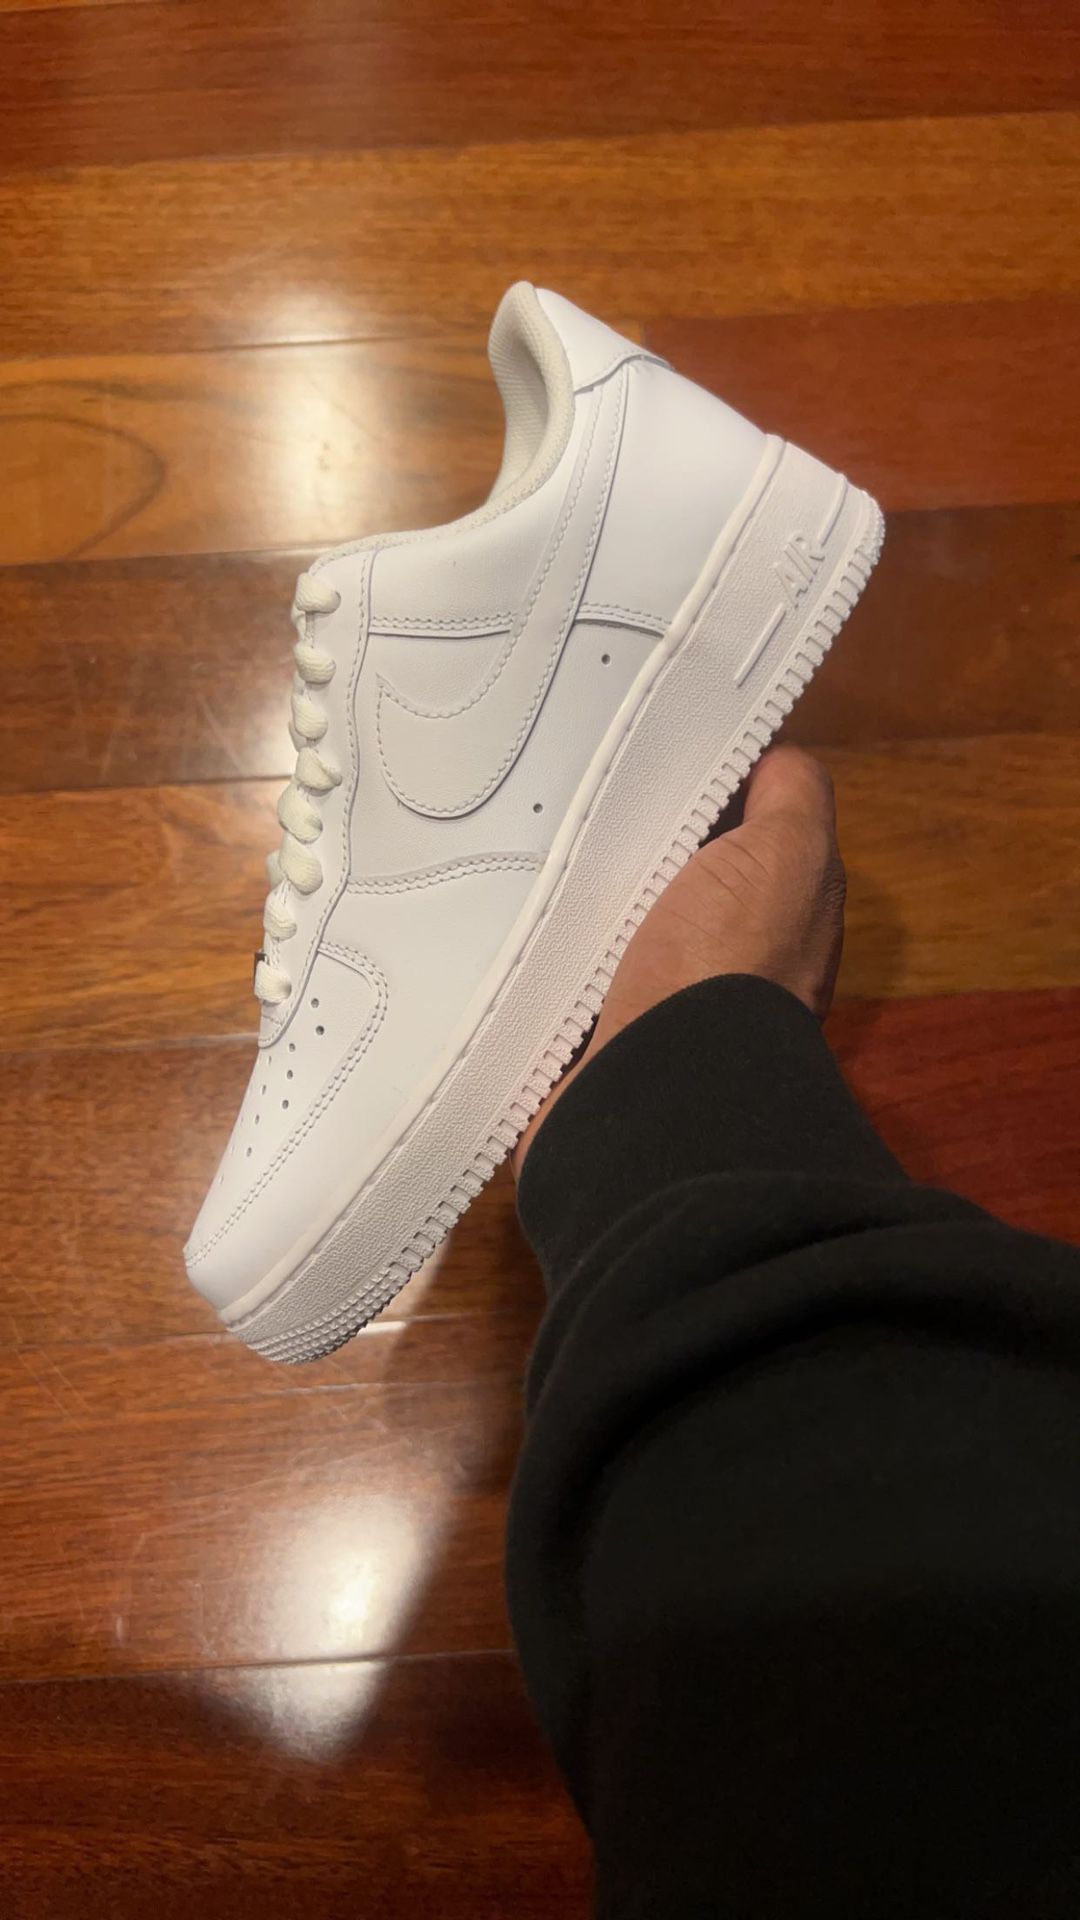 DS Nike Air Force 1 Low '07 “White” 